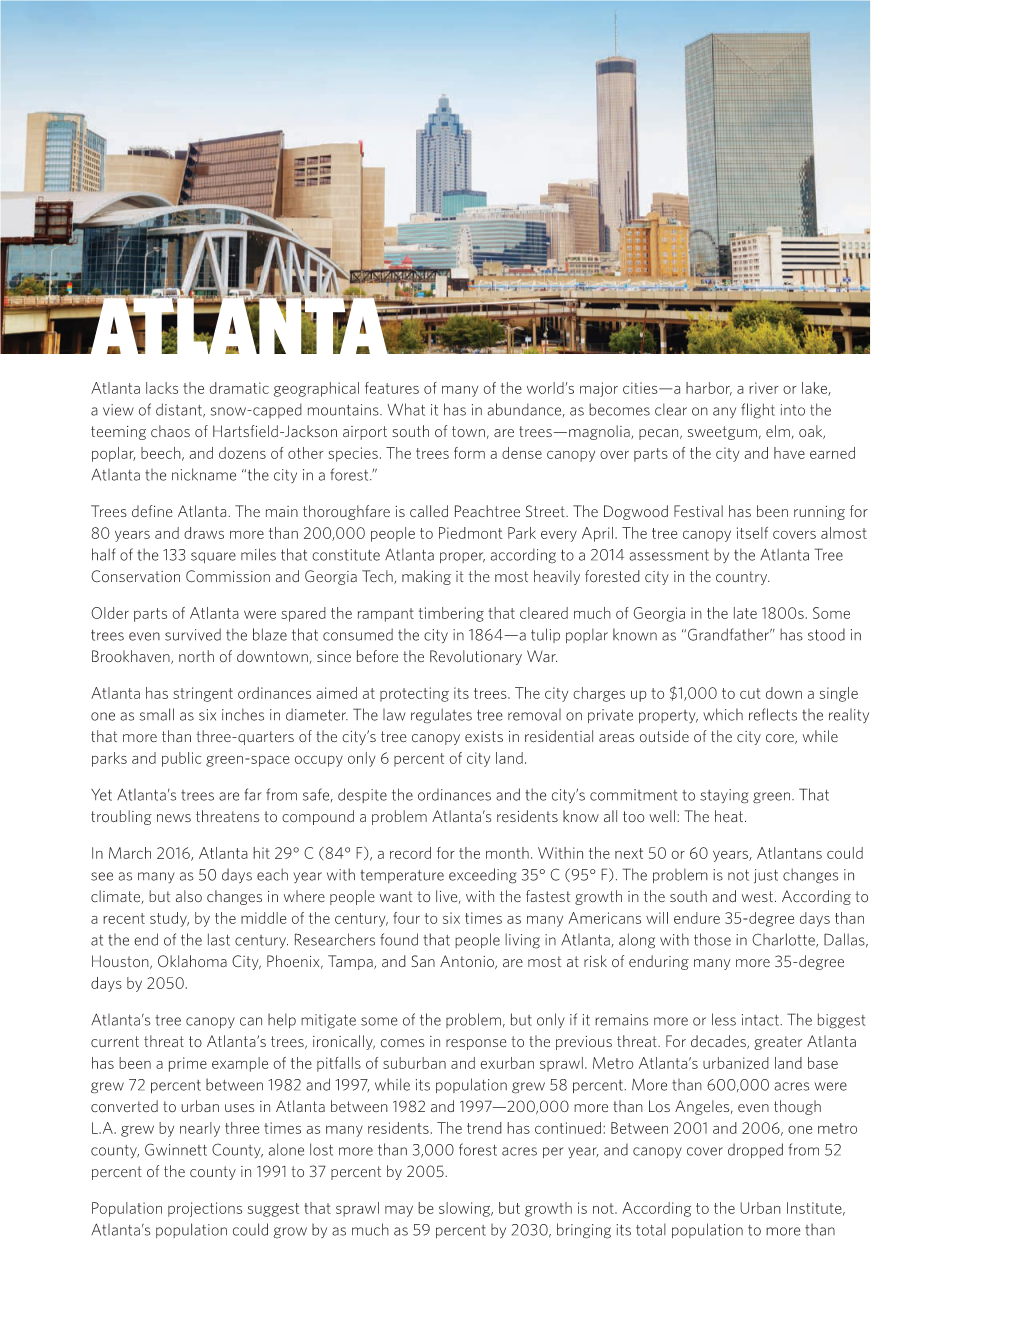 ATLANTA Atlanta Lacks the Dramatic Geographical Features of Many of the World’S Major Cities—A Harbor, a River Or Lake, a View of Distant, Snow-Capped Mountains